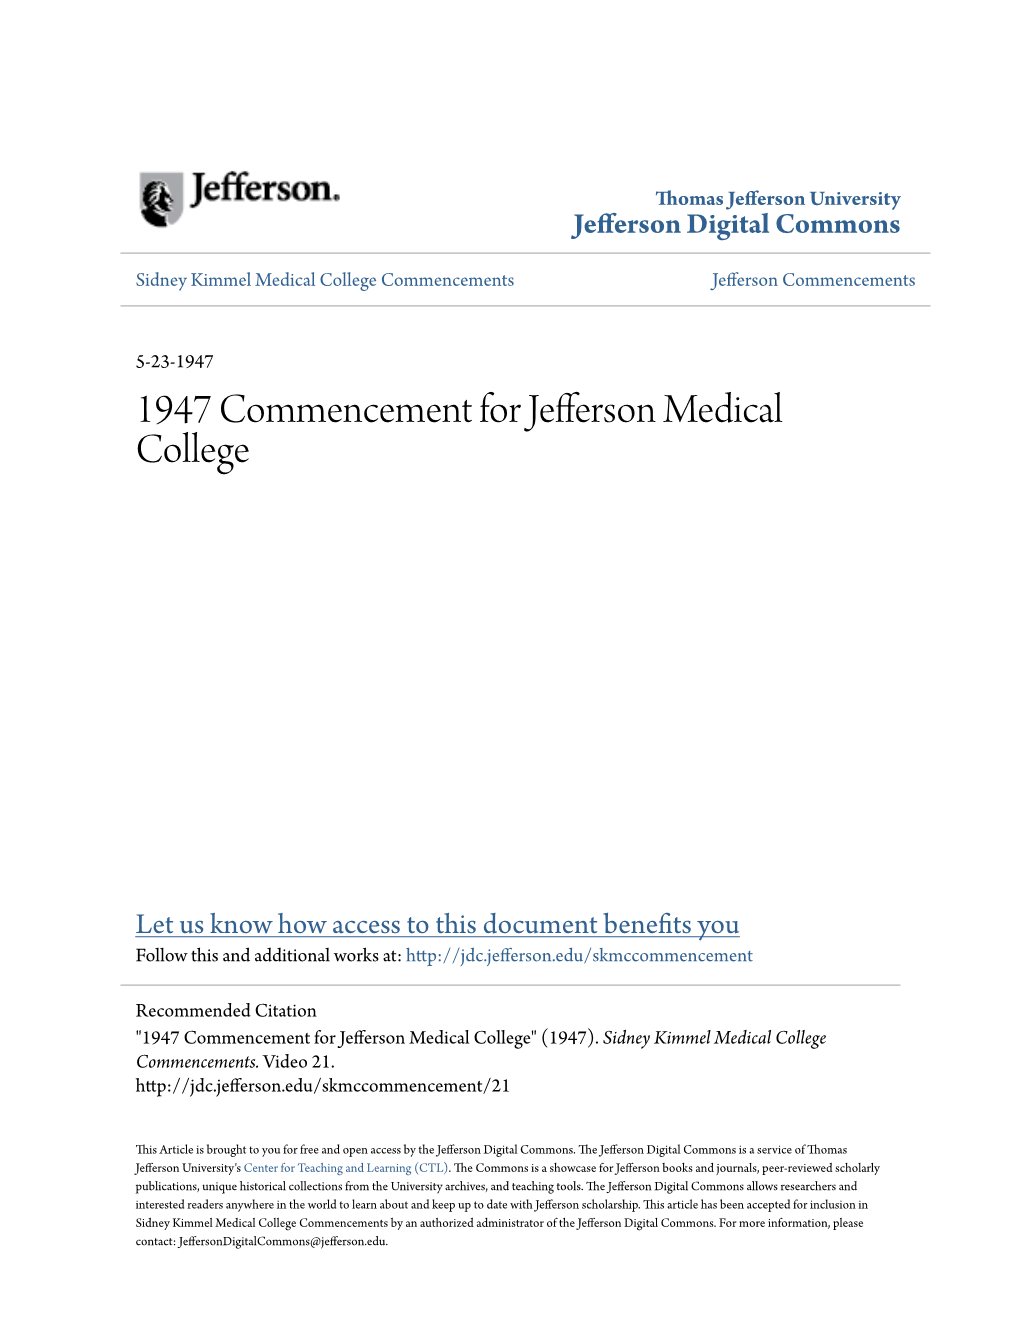 1947 Commencement for Jefferson Medical College